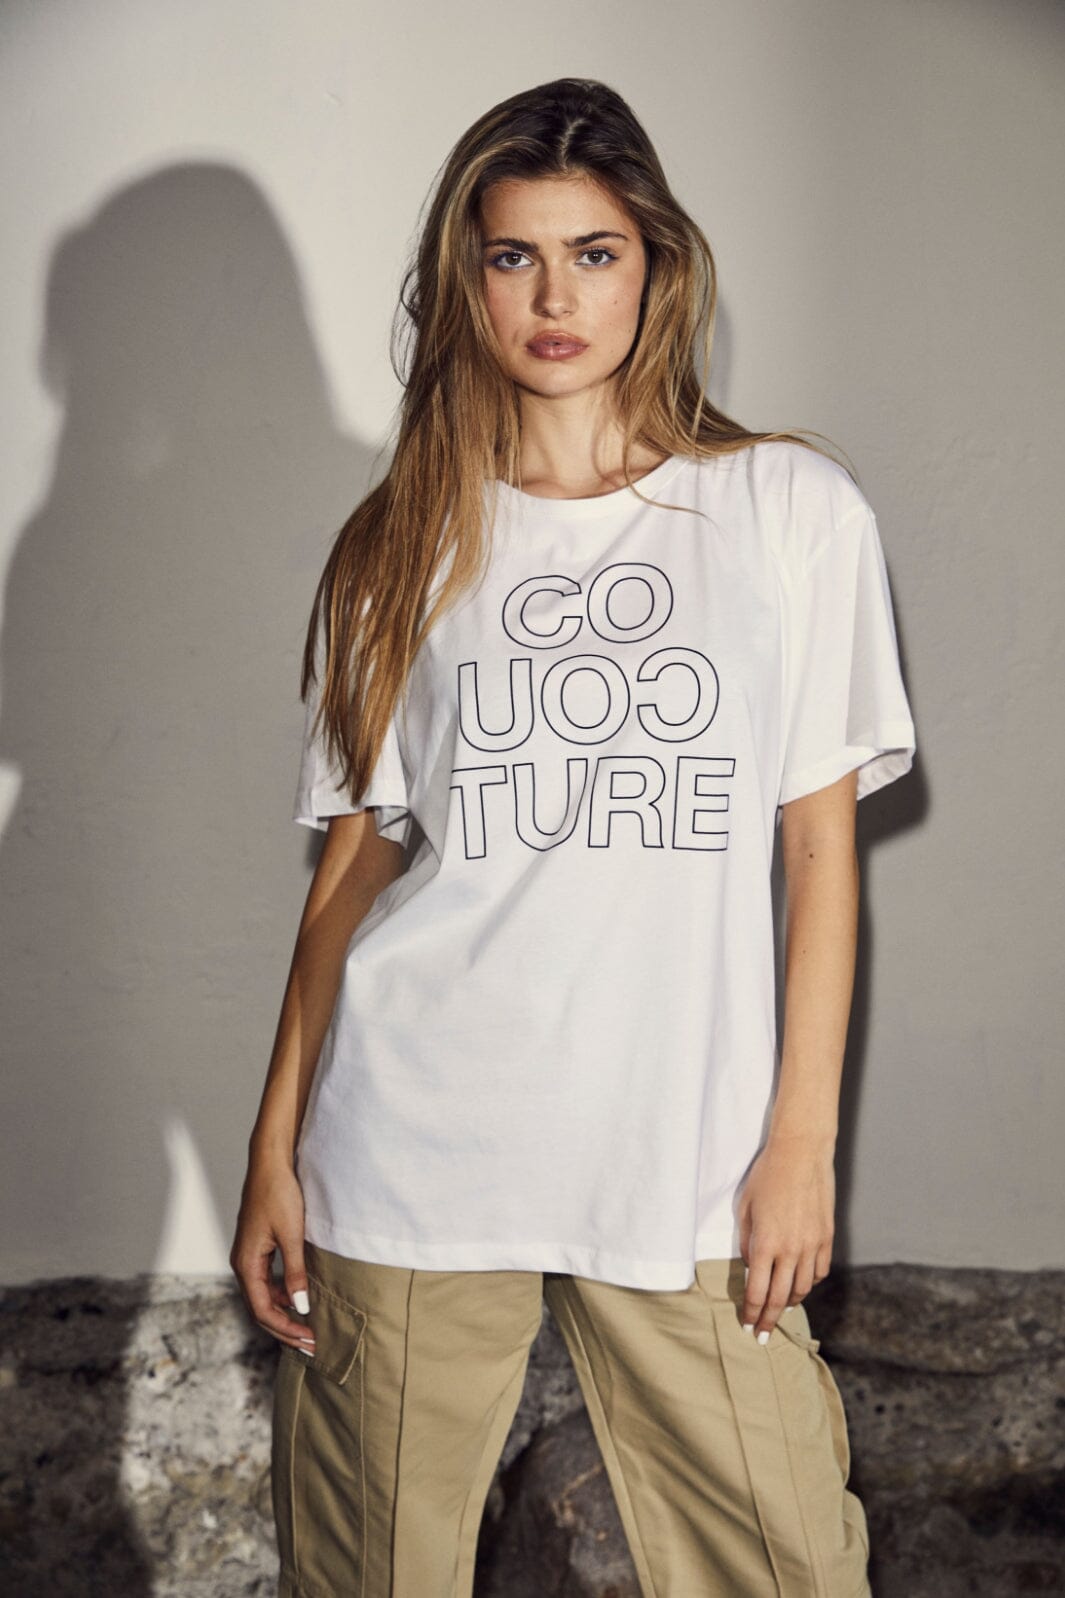 Forudbestilling - Co´couture - Outlinecc Oversize Tee 33052 - 4000 White T-shirts 